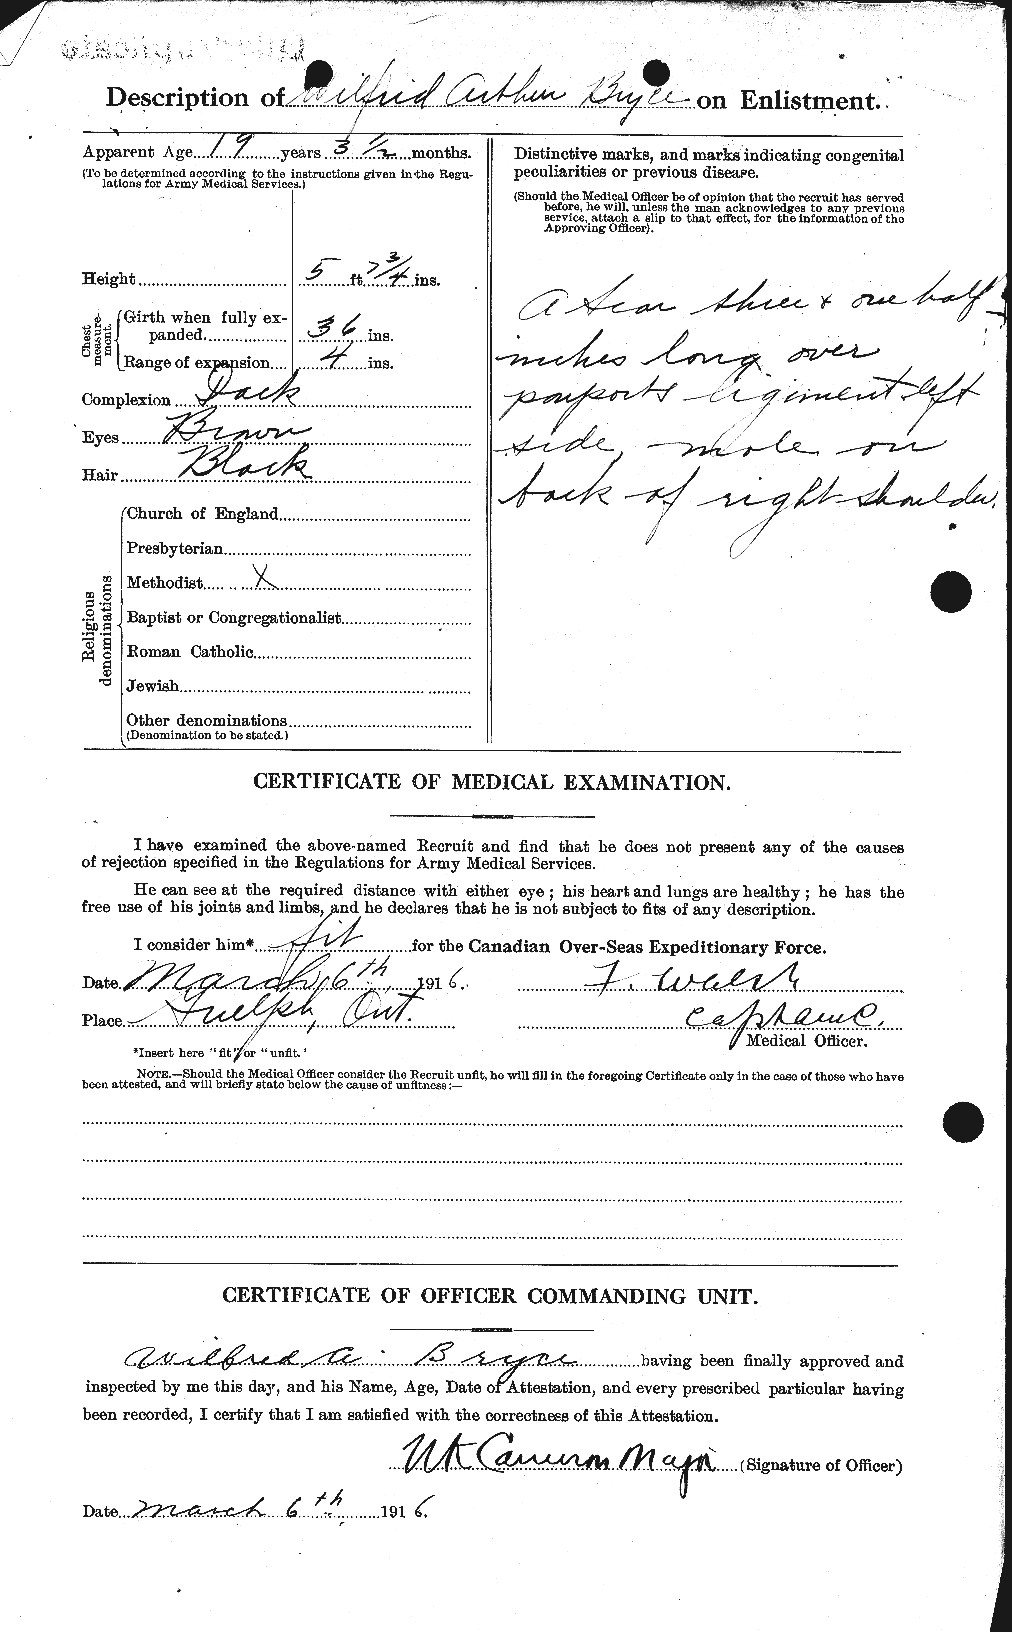 Personnel Records of the First World War - CEF 268764b